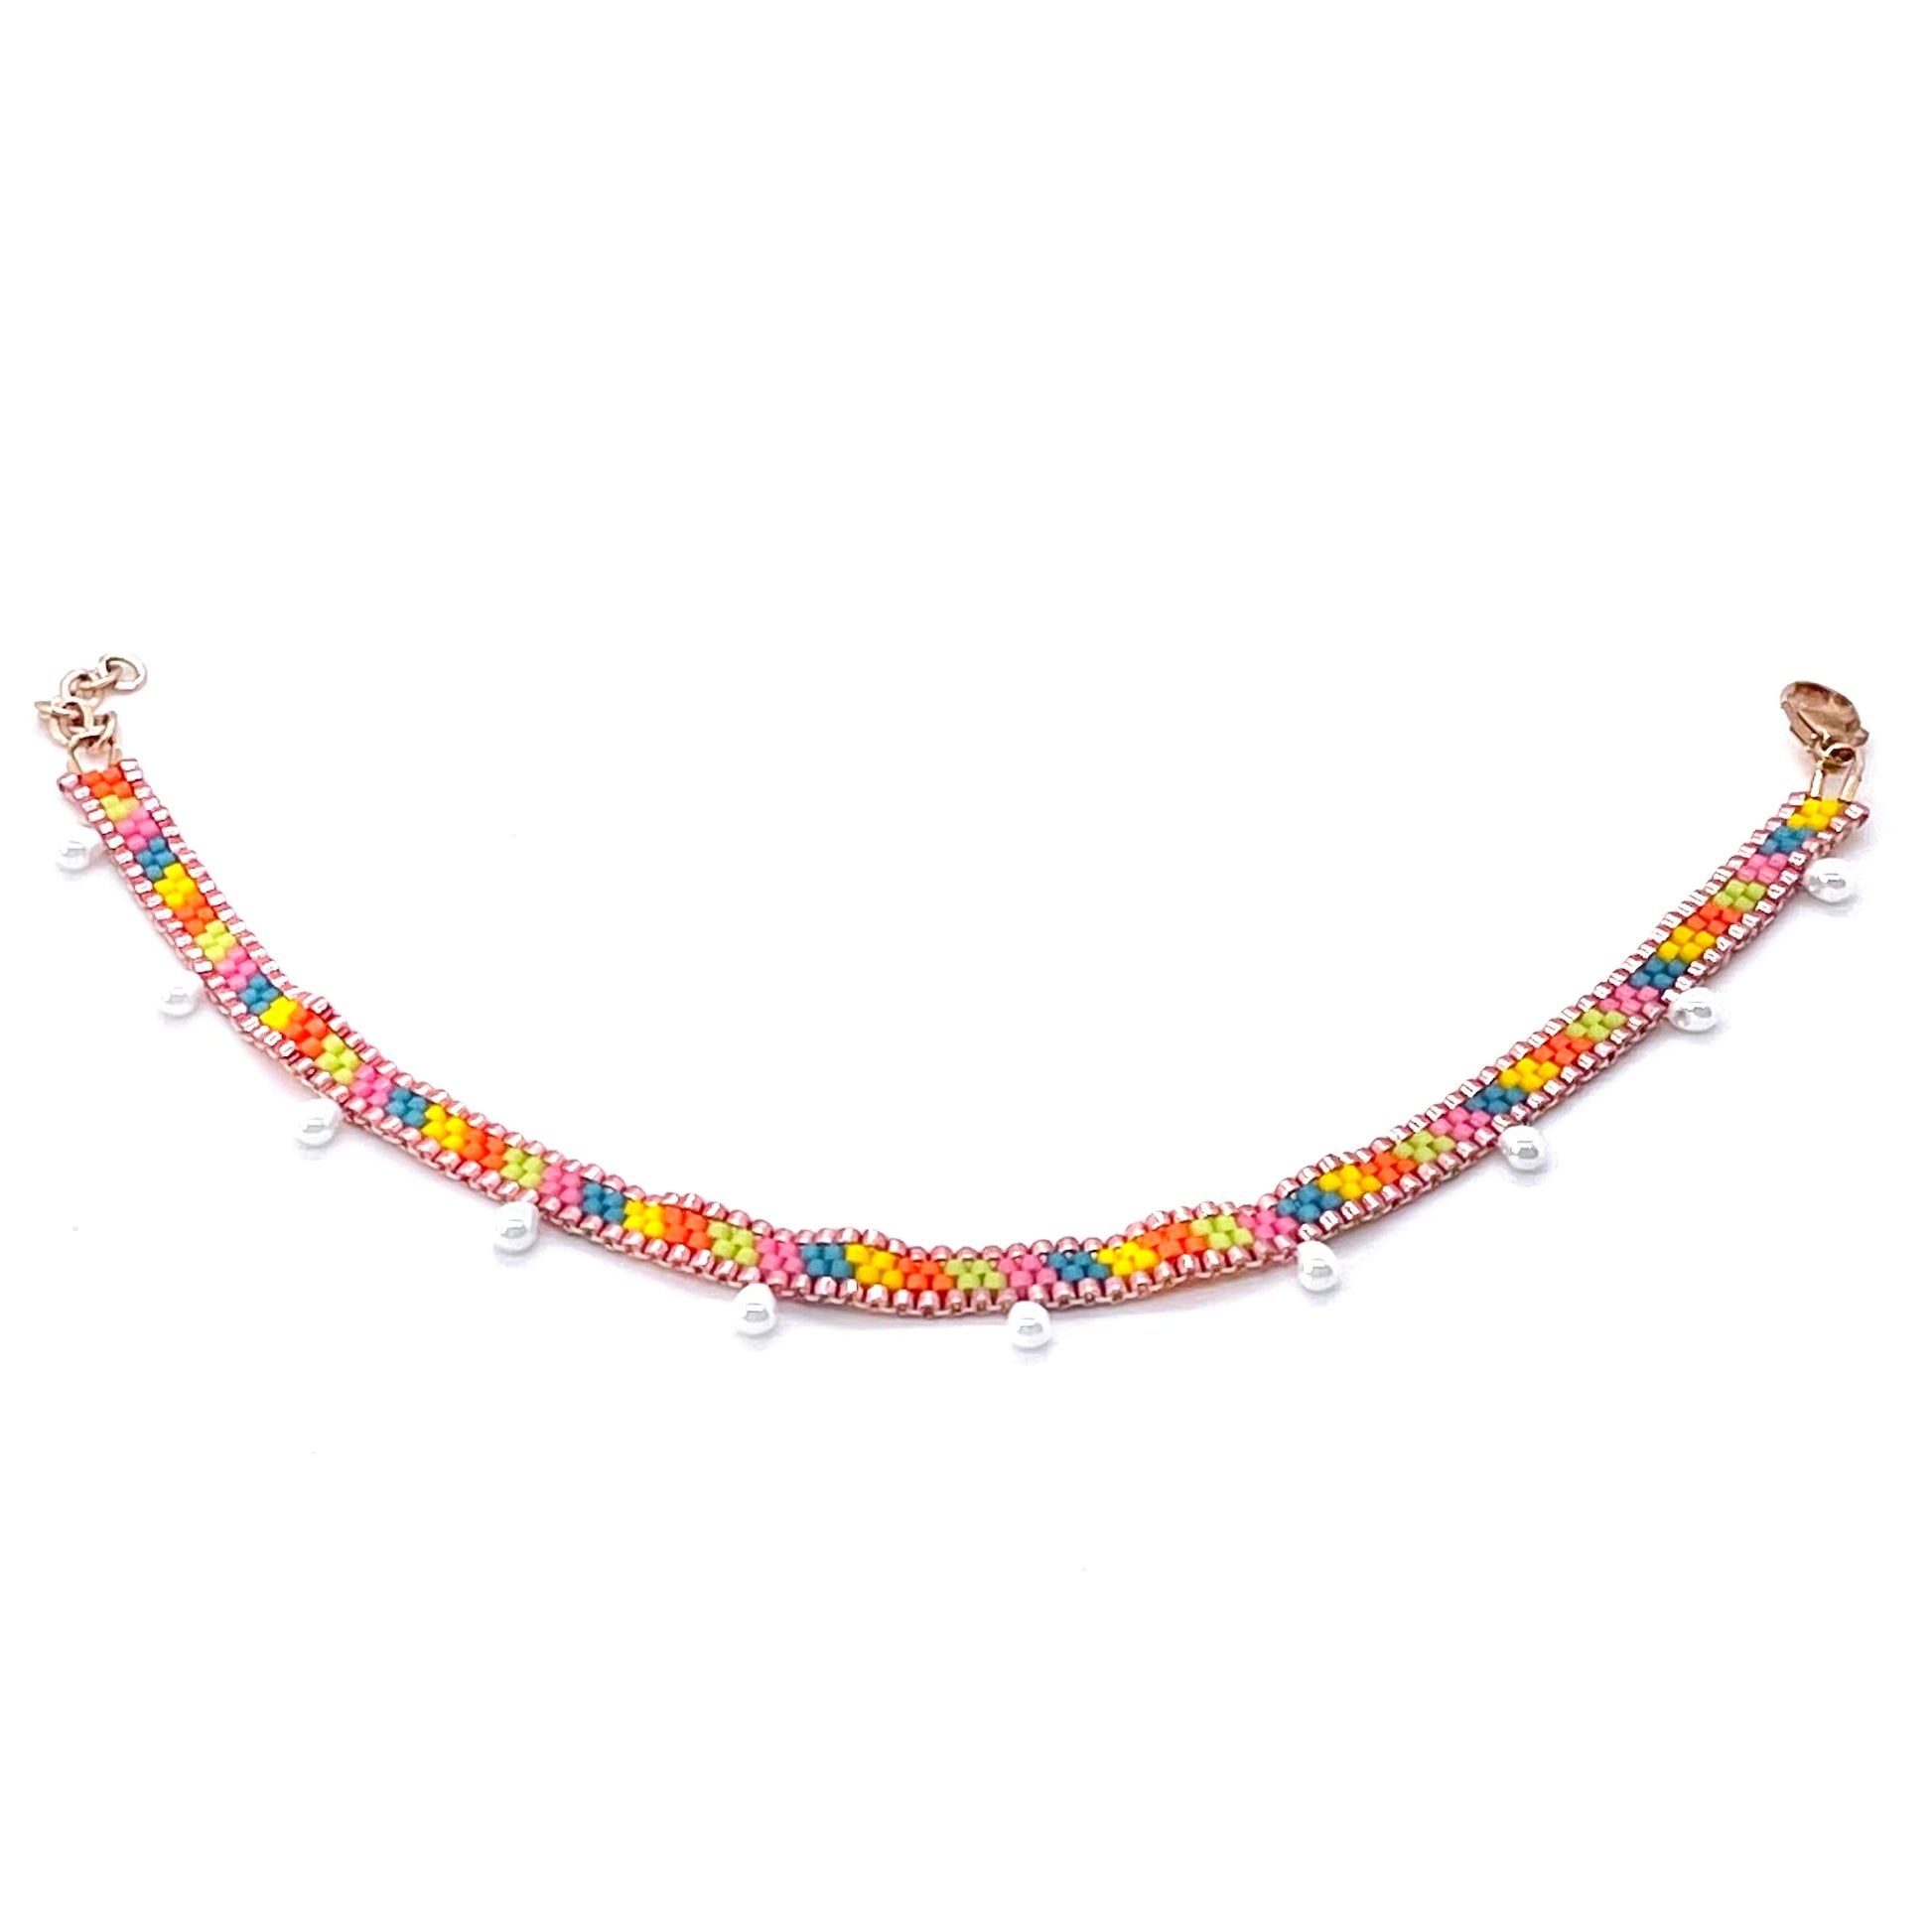 Women's ankle bracelet with bright fruity color candy stripes and pearl droplet beads. Handwoven with peyote stitch. Made in NYC.